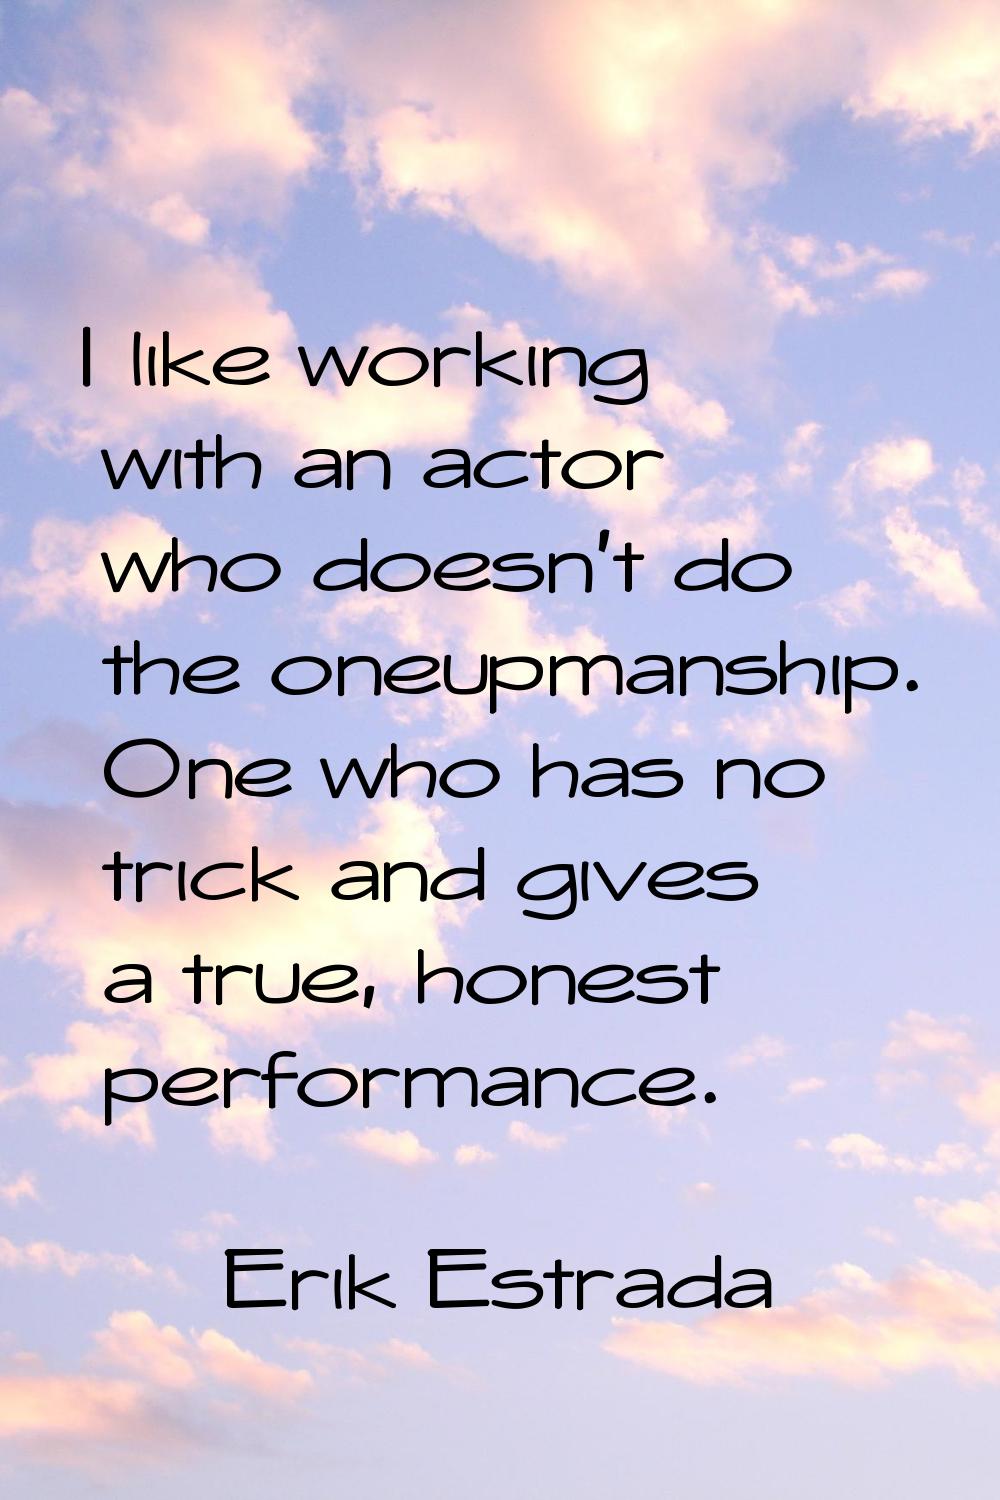 I like working with an actor who doesn't do the oneupmanship. One who has no trick and gives a true